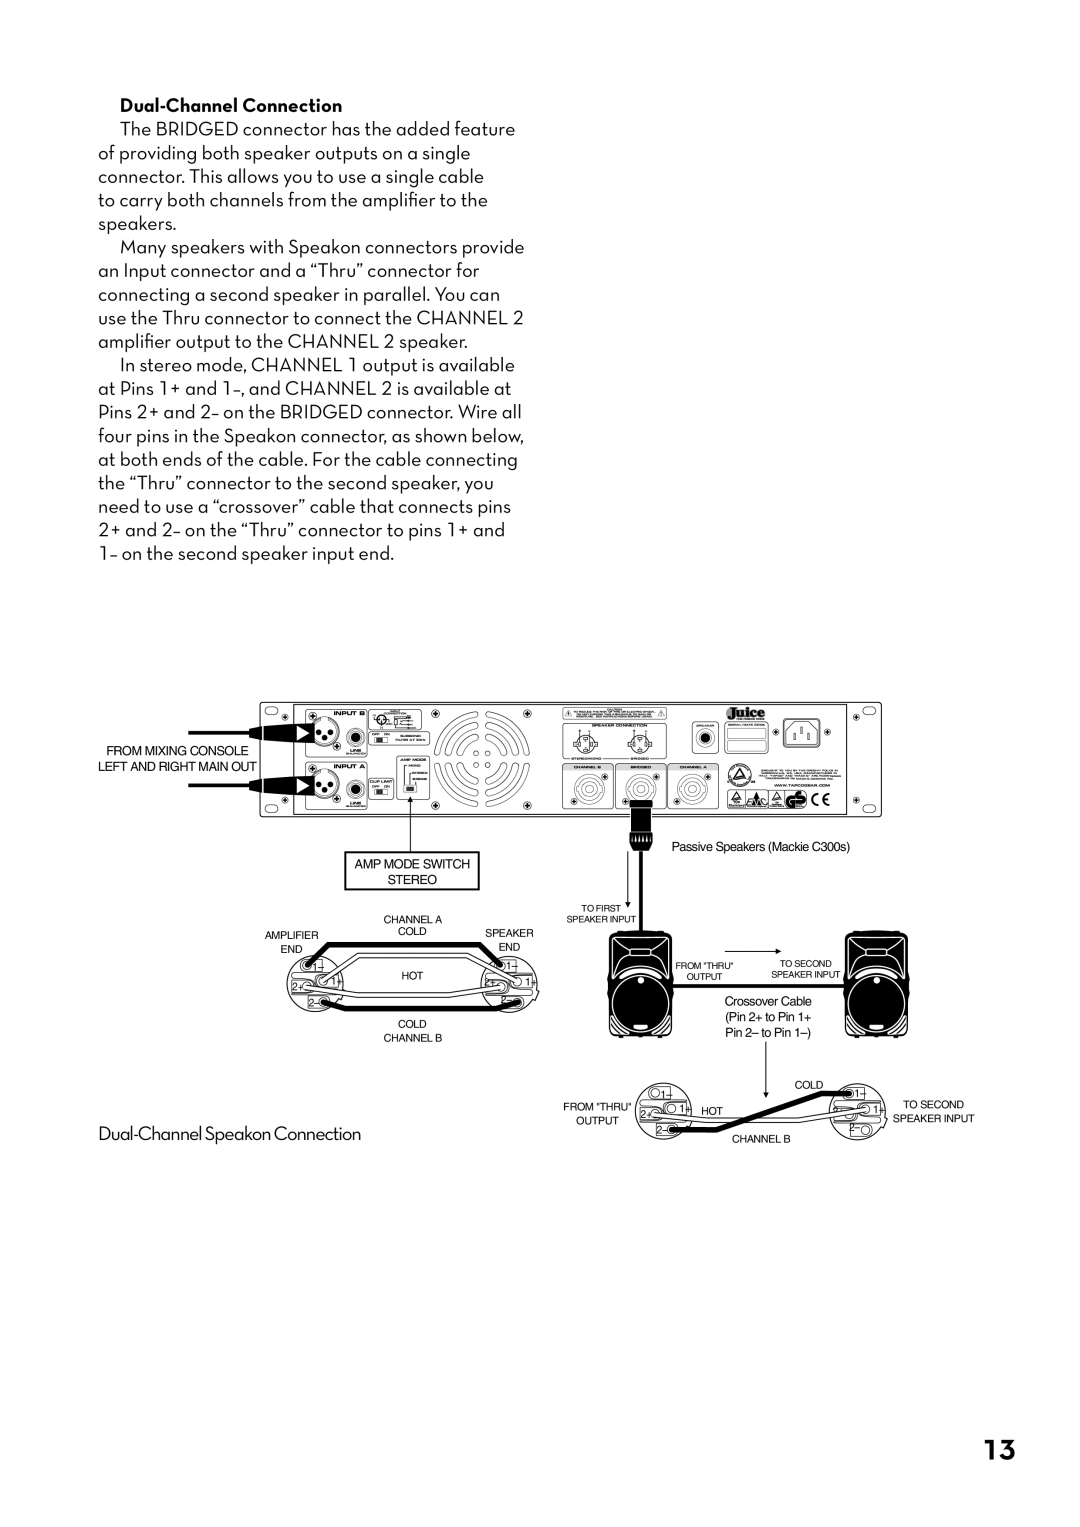 Tapco pmn manual Dual-ChannelConnection, Dual-ChannelSpeakonConnection 